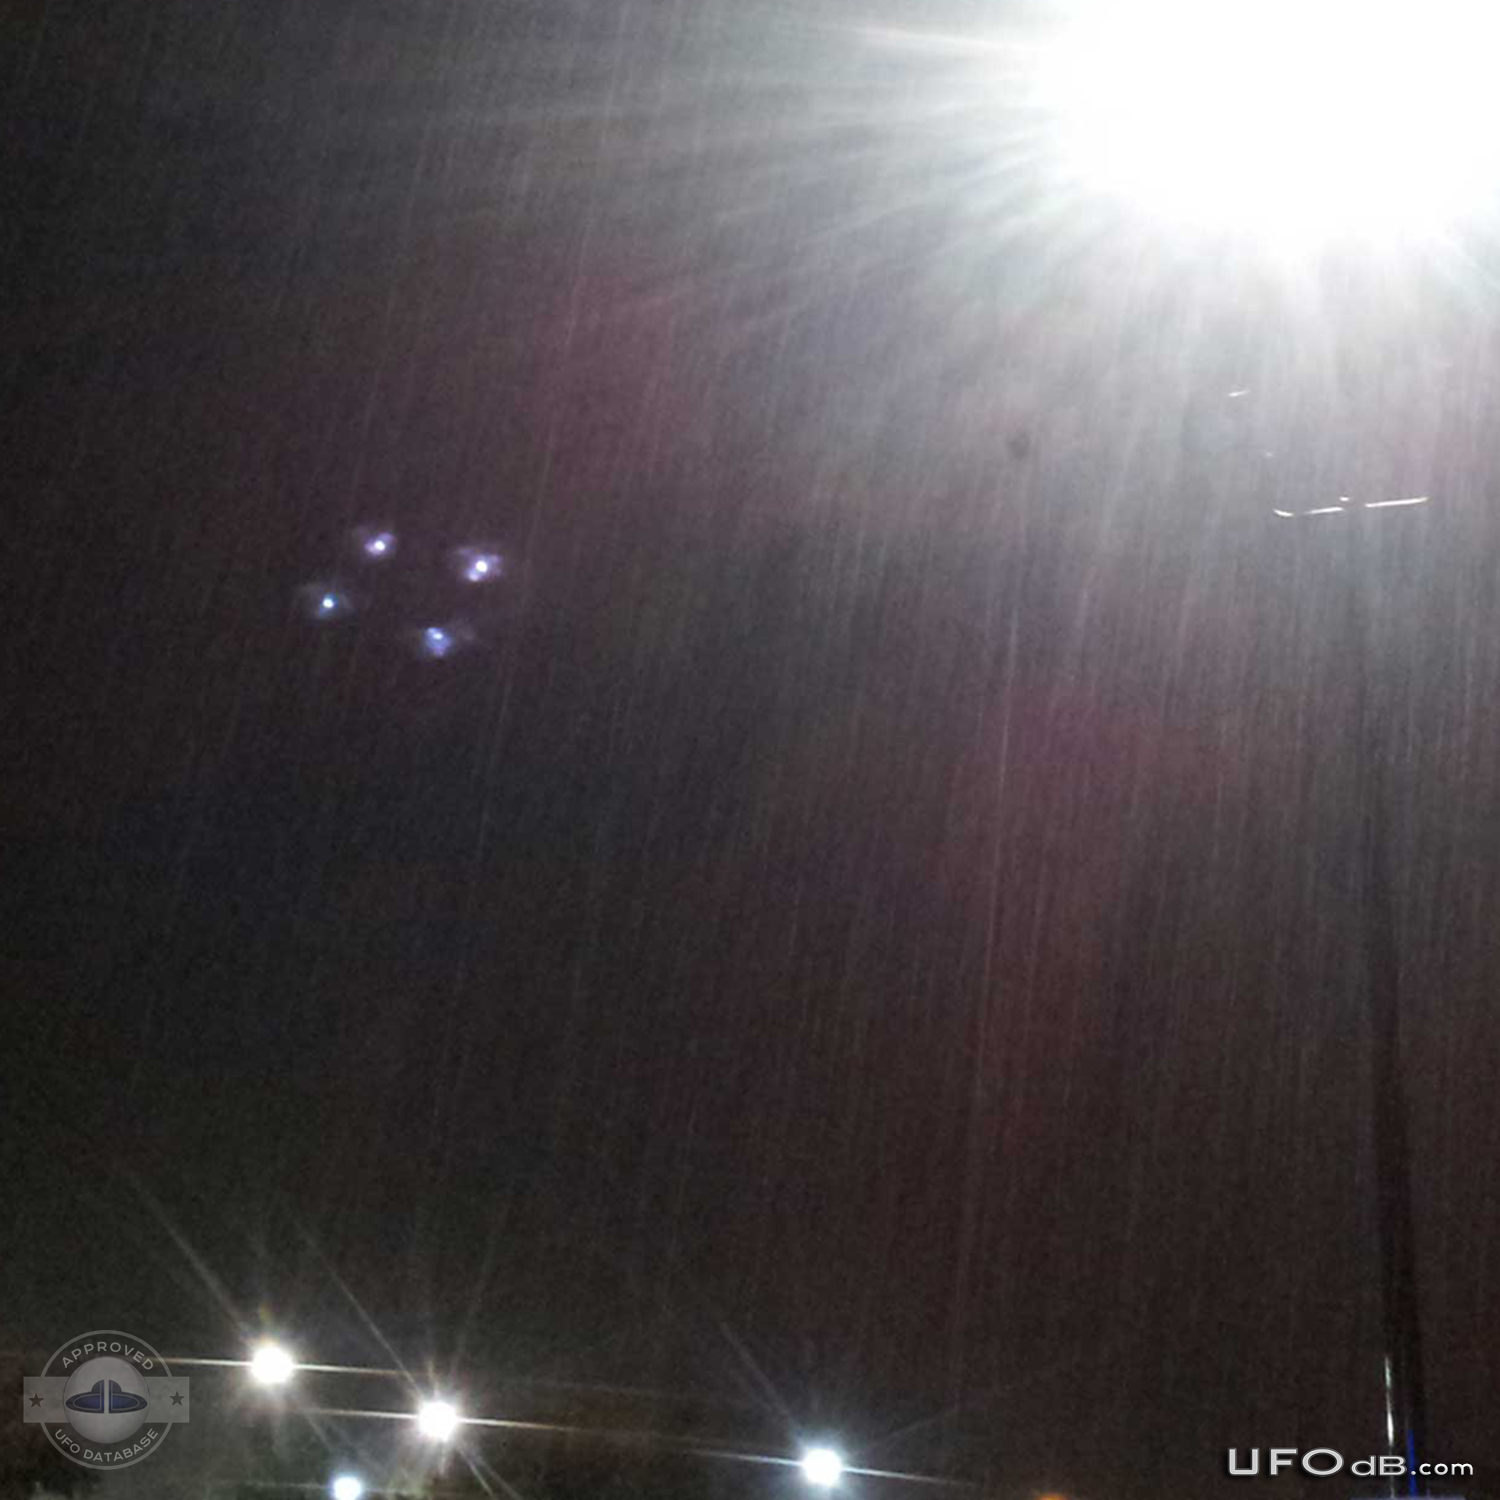 Square shaped UFO caught on picture during heavy rainfall - Rialto CA UFO Picture #384-2